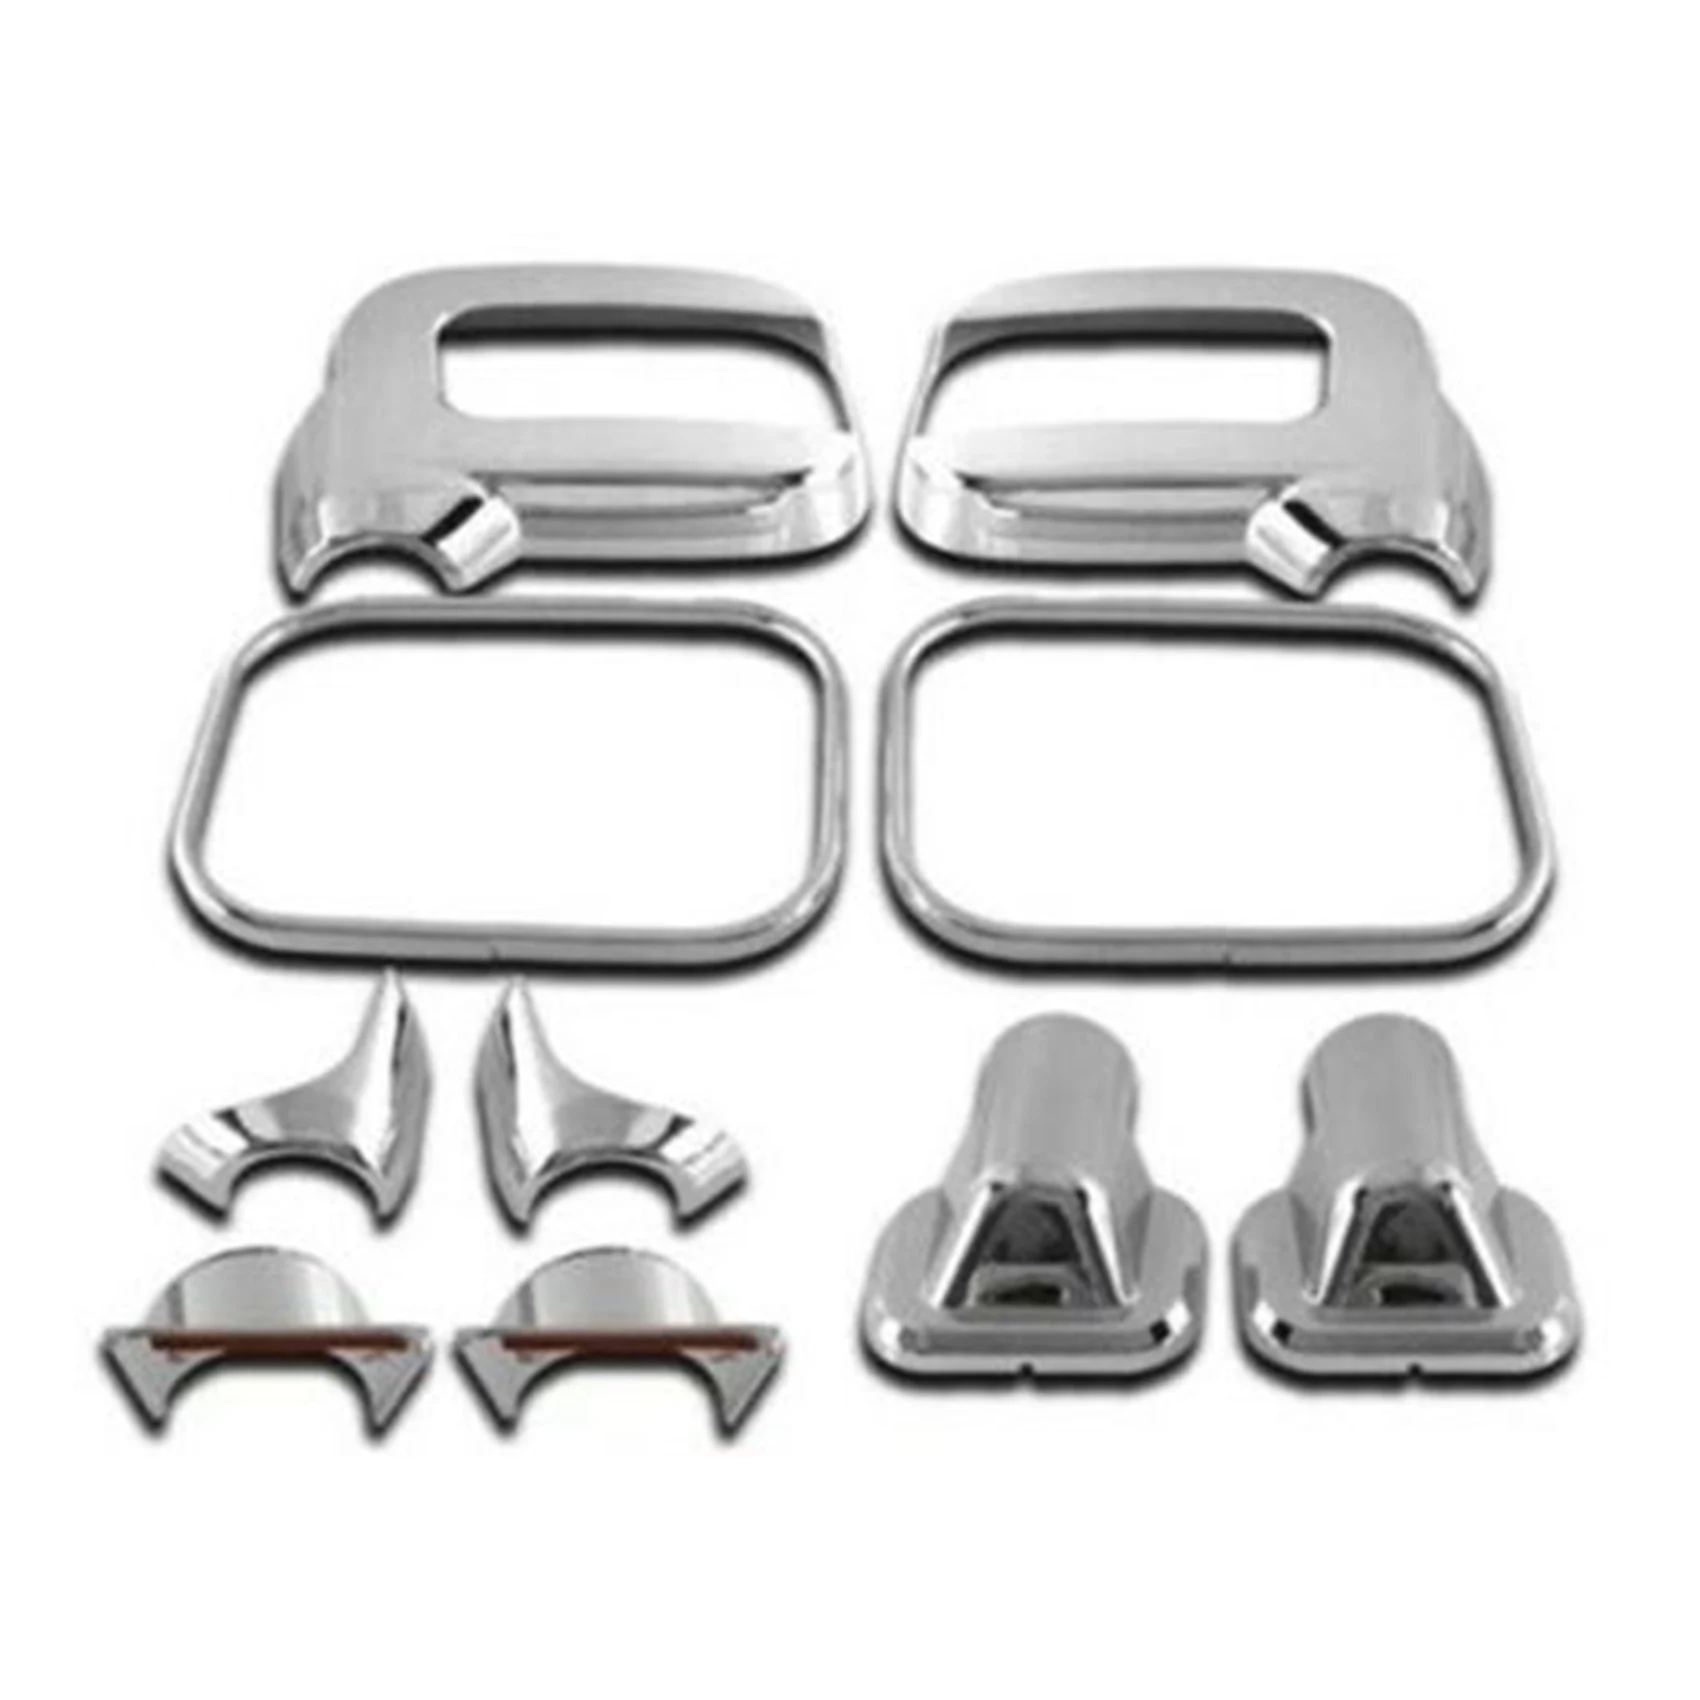 

10PCS Mirror Cover Door Trims Rearview Turn Siganl Cap for HUMMER H2 SUV SUT 2006-2009